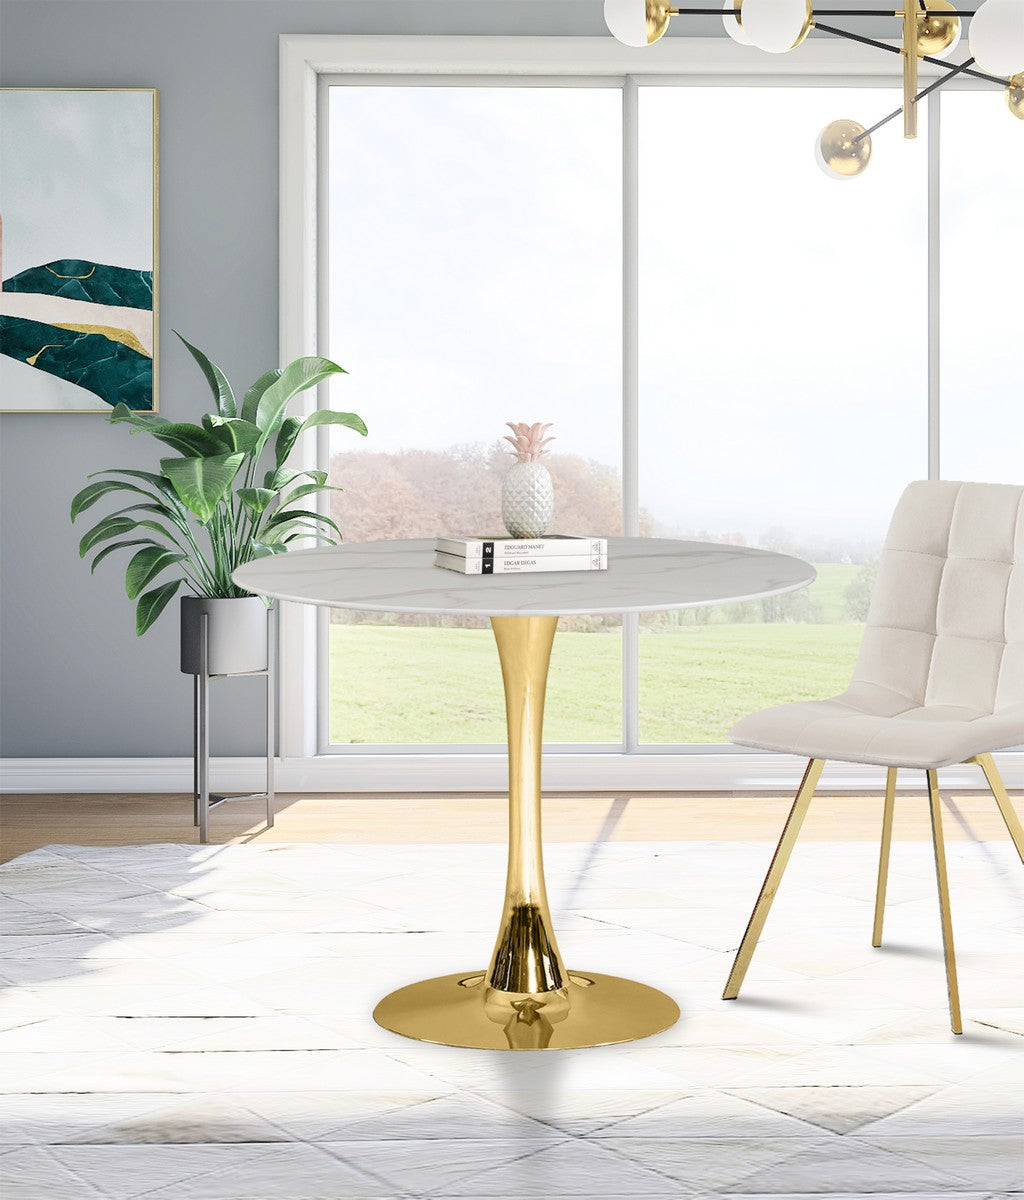 Meridian Furniture Tulip Gold Dining Table (3 Boxes)